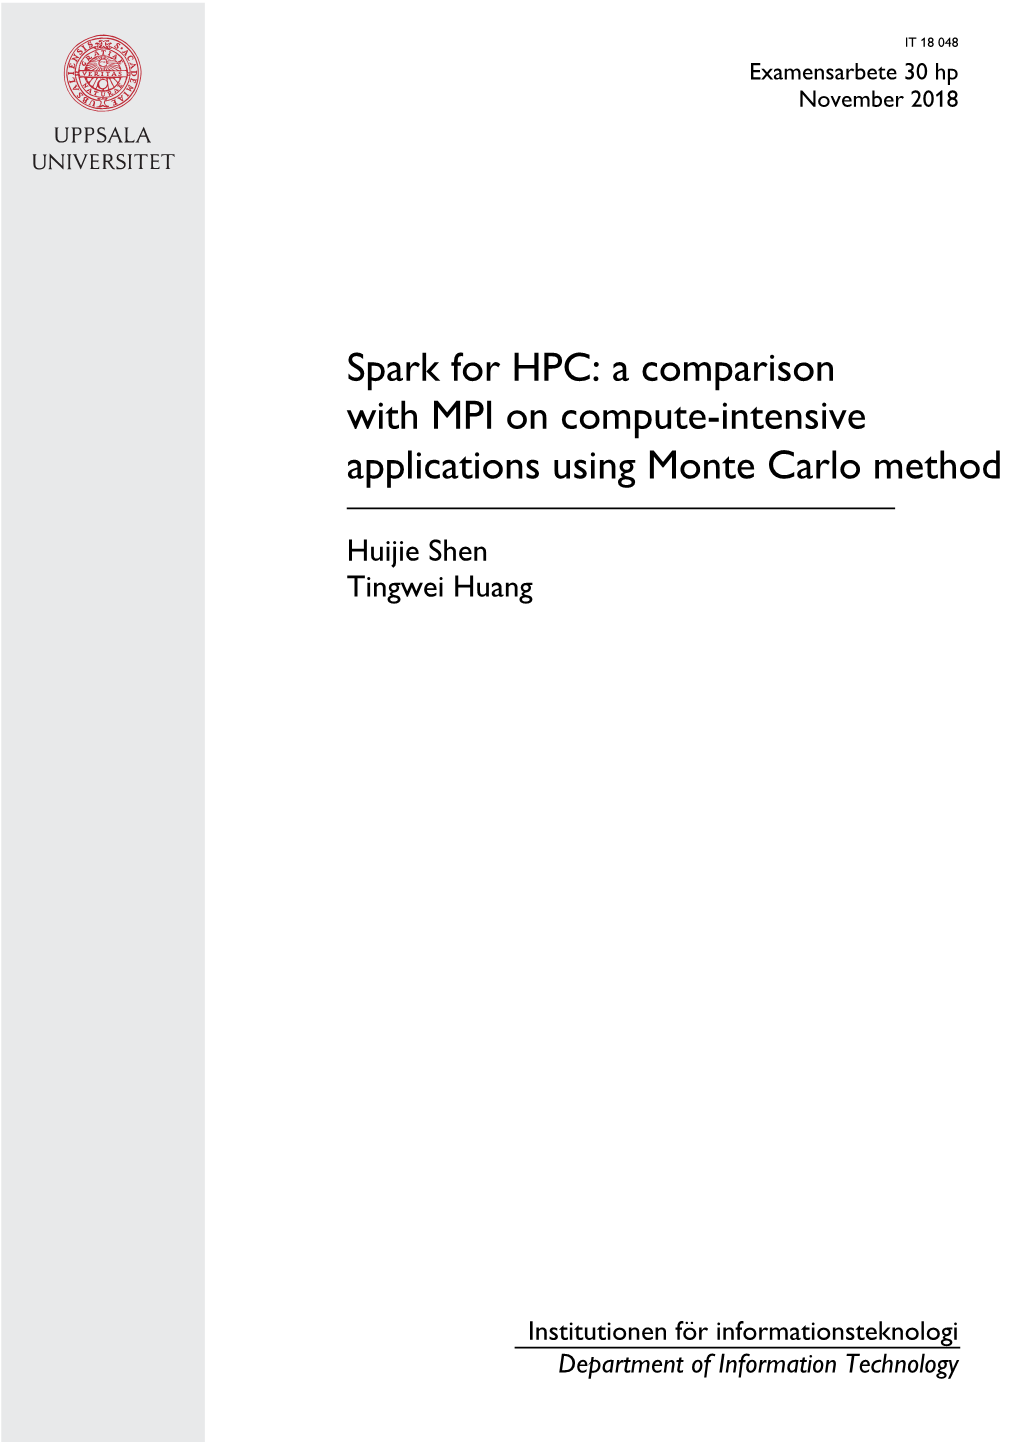 Spark for HPC: a Comparison with MPI on Compute-Intensive Applications Using Monte Carlo Method